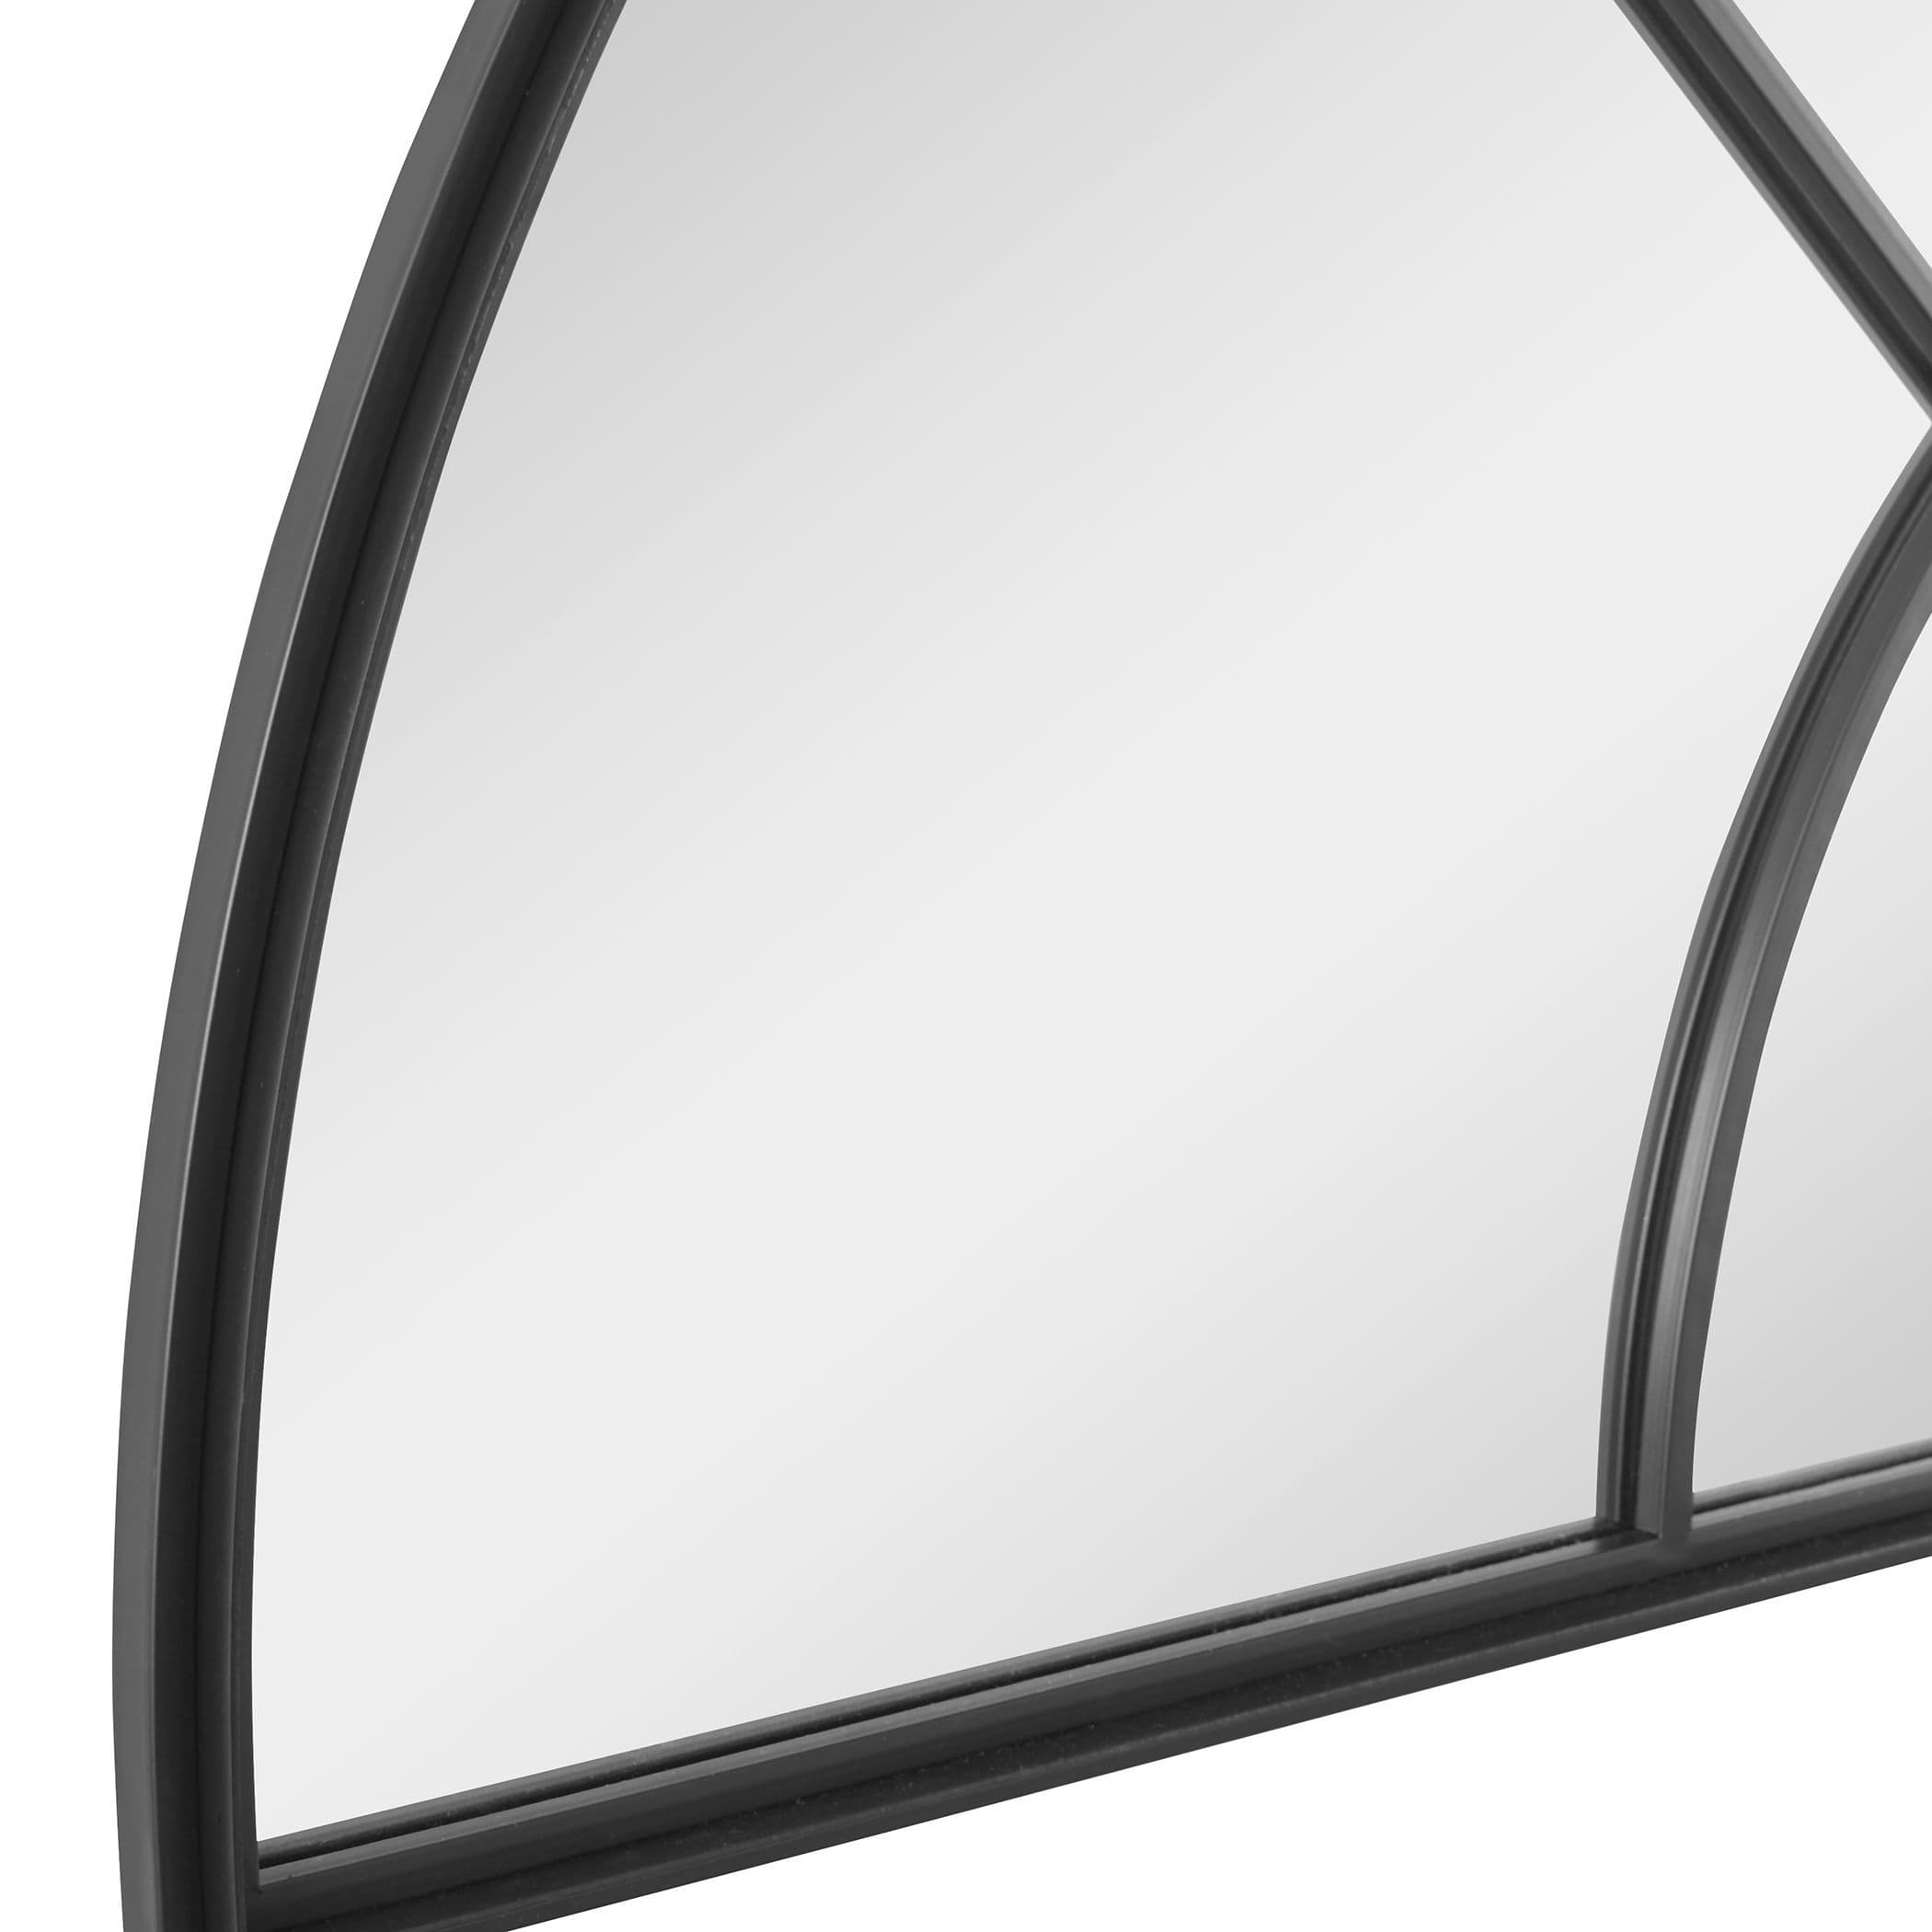 Rouse Iron Arched Window Mirror Uttermost